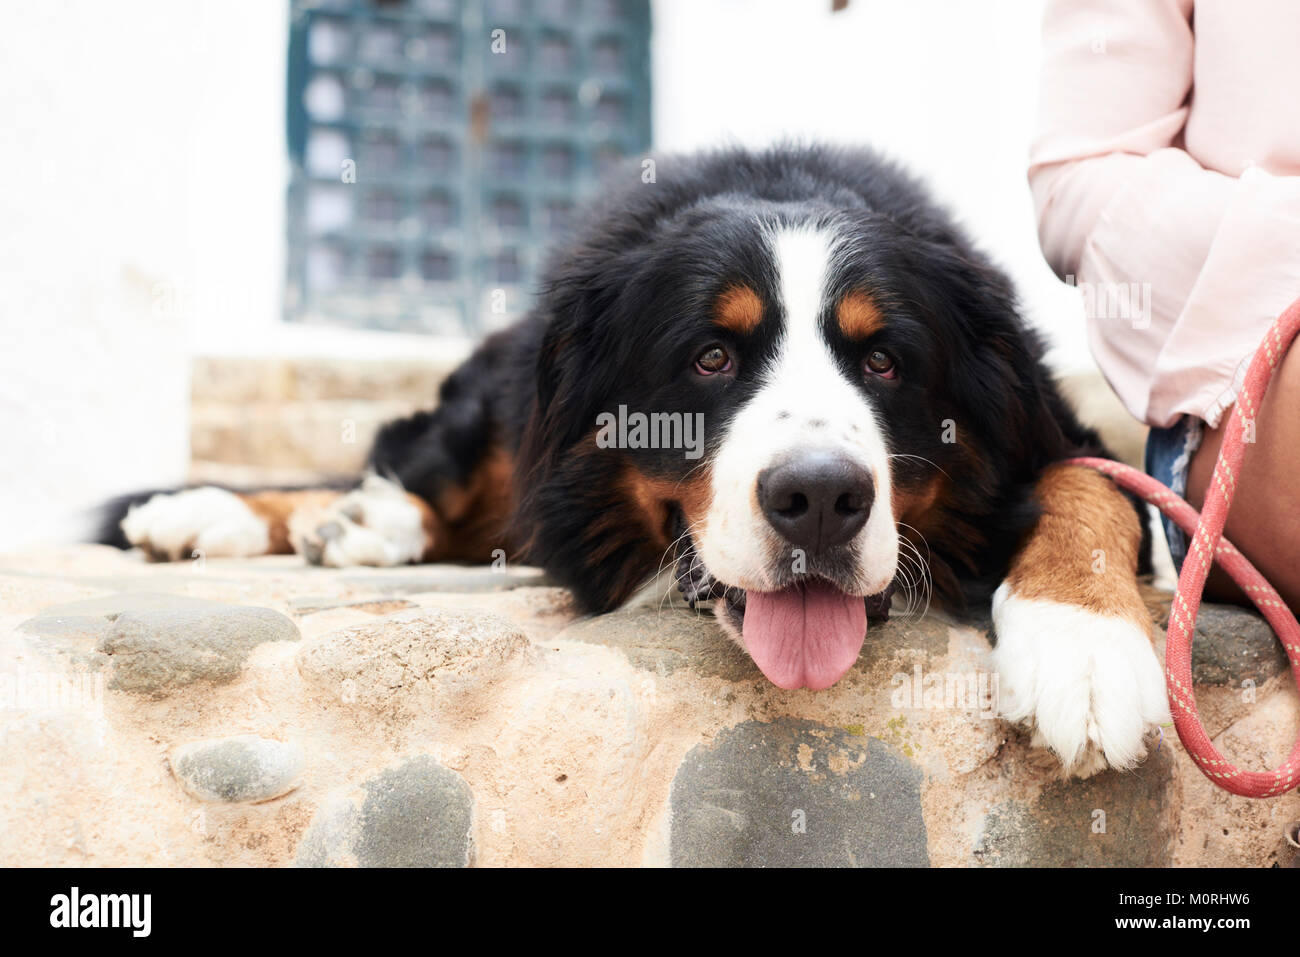 Pretty portrait of a bernese mountain dog lying on the ground with a tired faced. Stock Photo